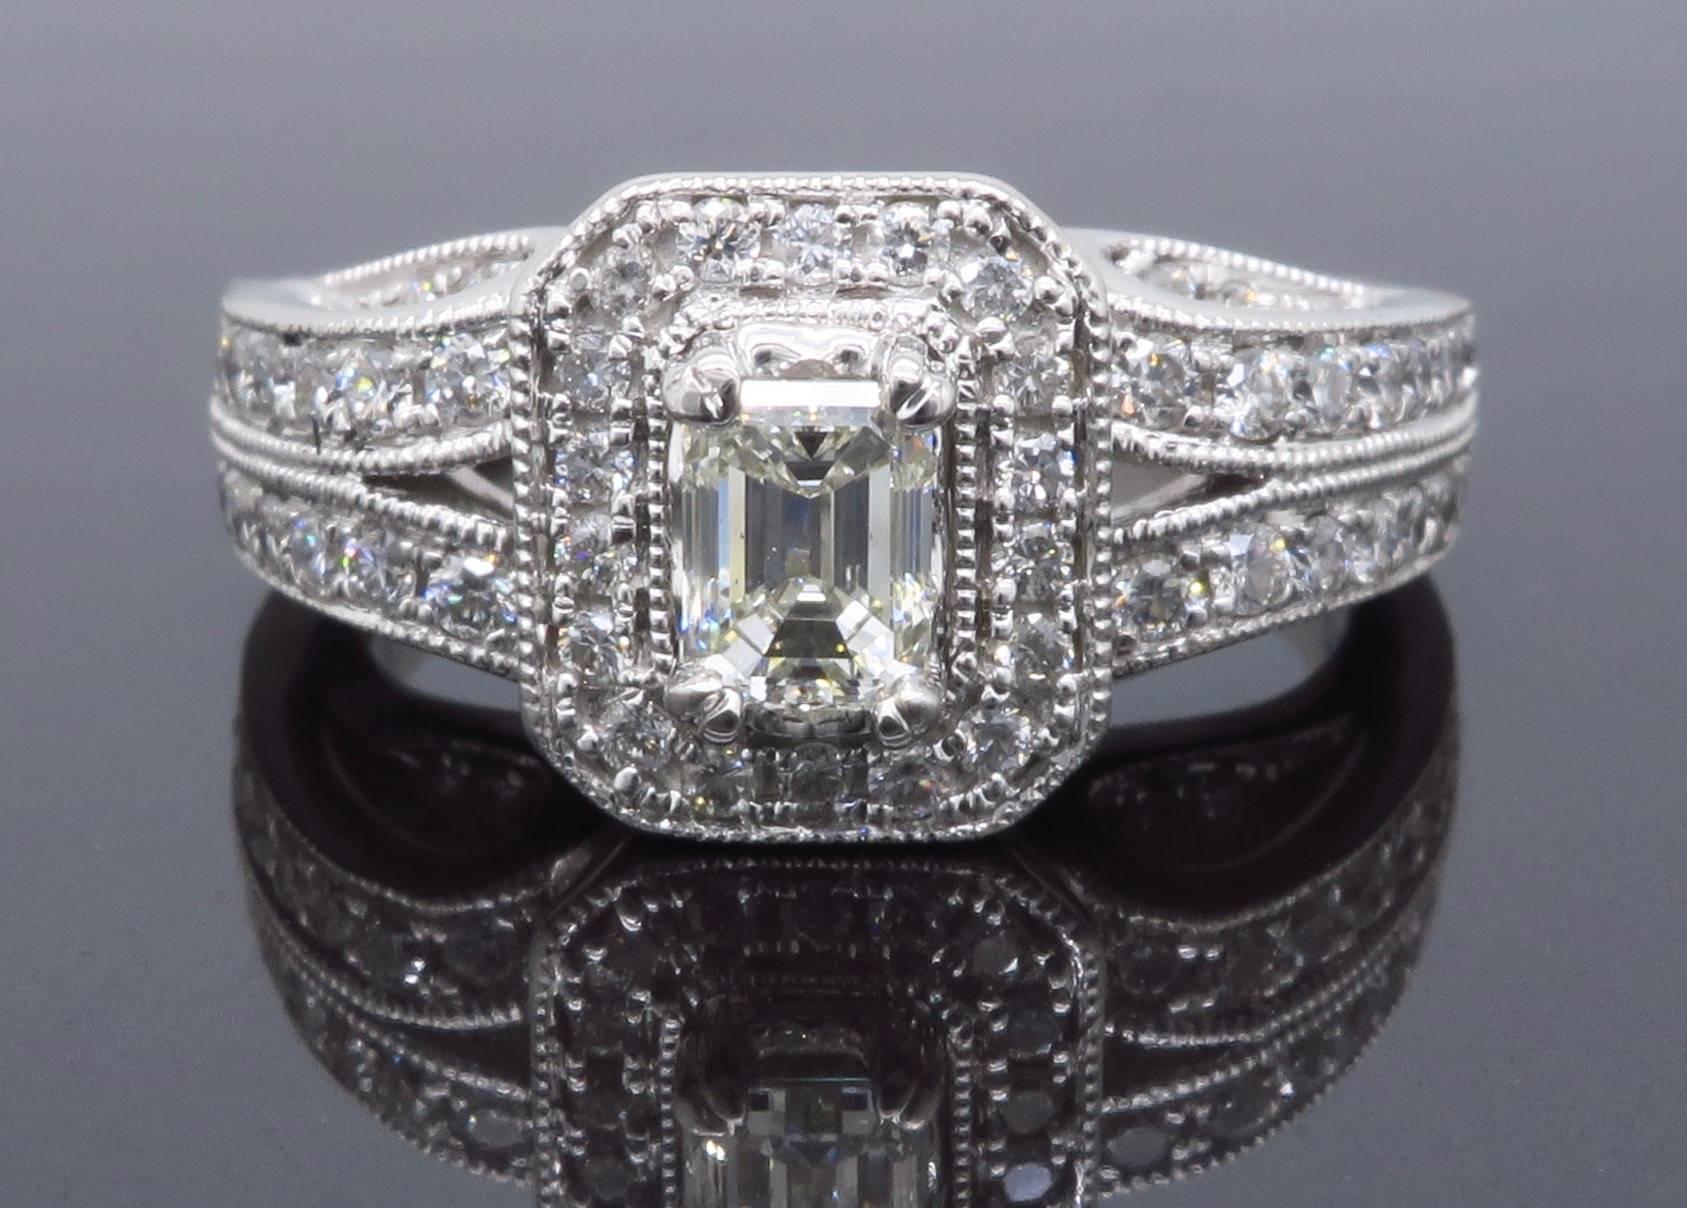 Beautiful ring featuring an IGI Certified .40CT Emerald Cut Diamond with SI1-SI2 Clarity and H-I Color.  There are 70 additional Round Brilliant Cut Diamonds that adorn the 14K white gold ring. The total approximate carat weight is 1.00CTW.